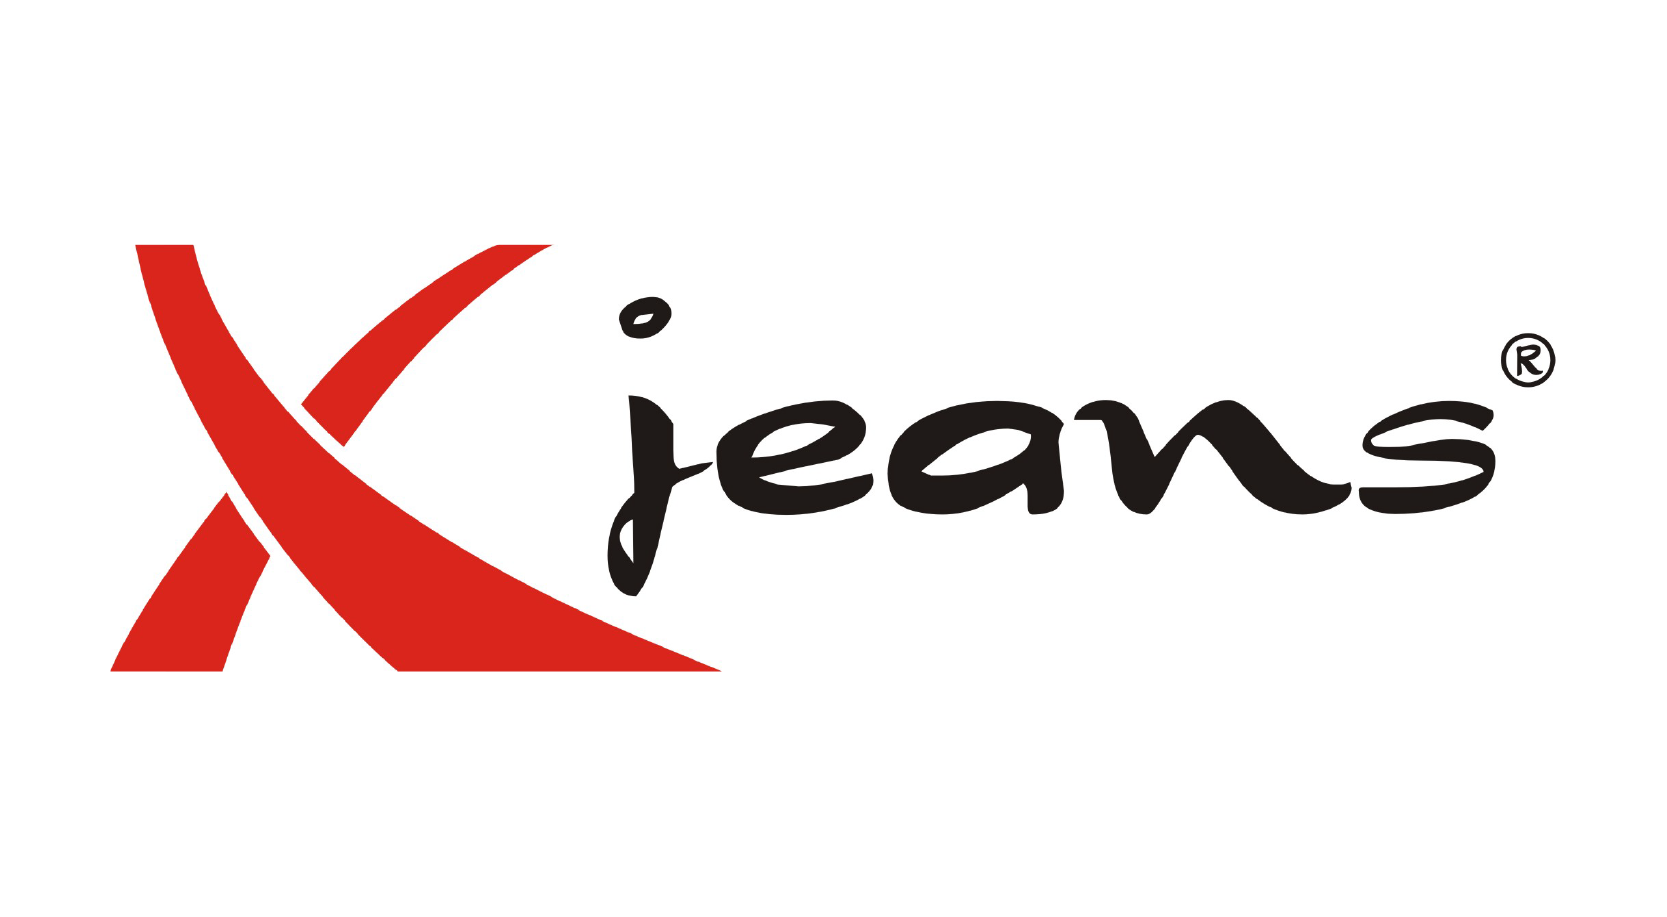 X Jeans